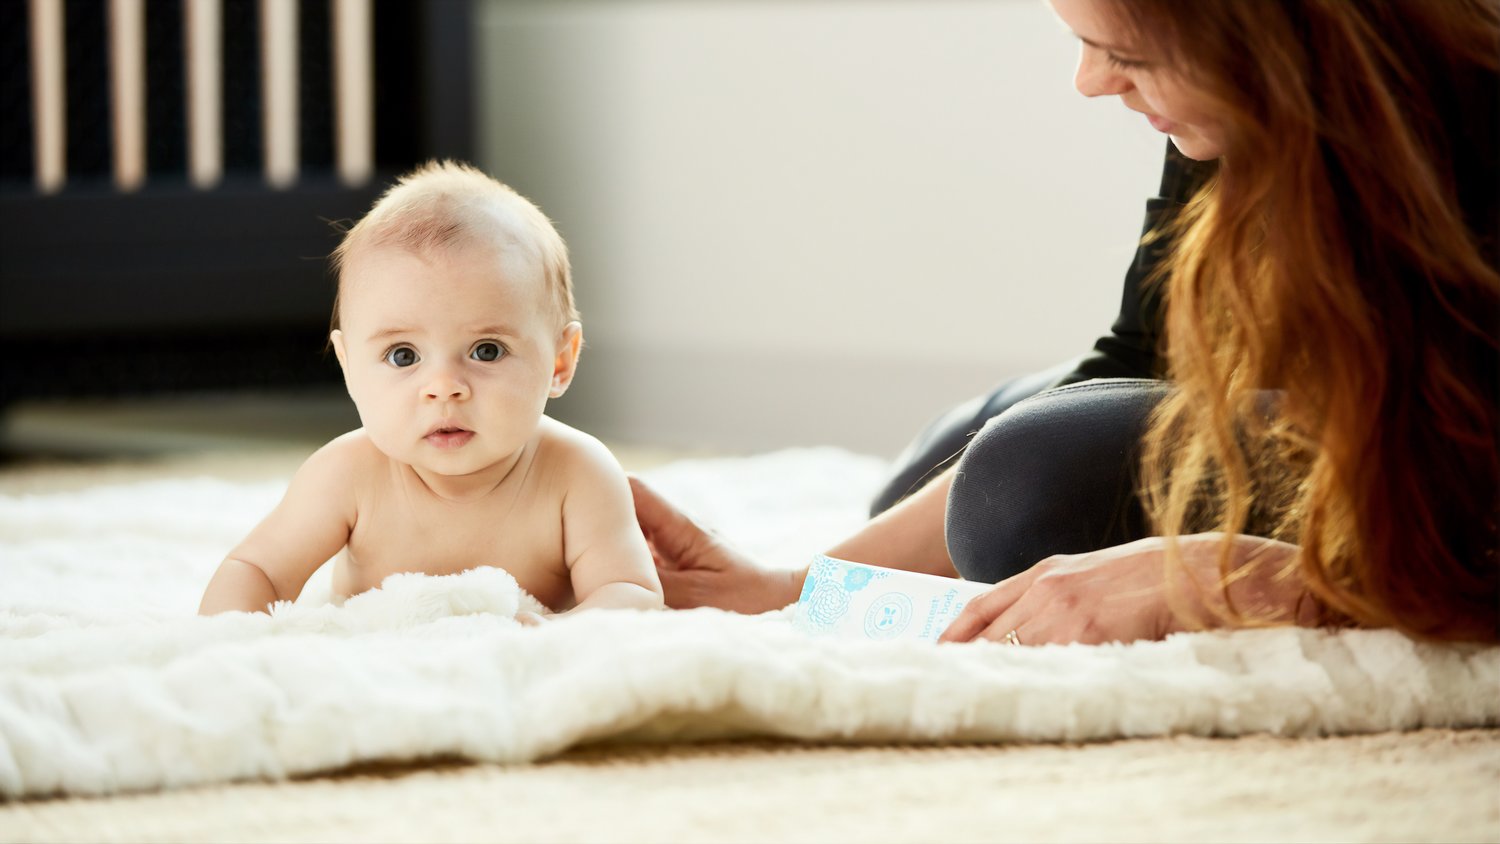 Bodywork: Gentle exercises, tummy time and massage for babies